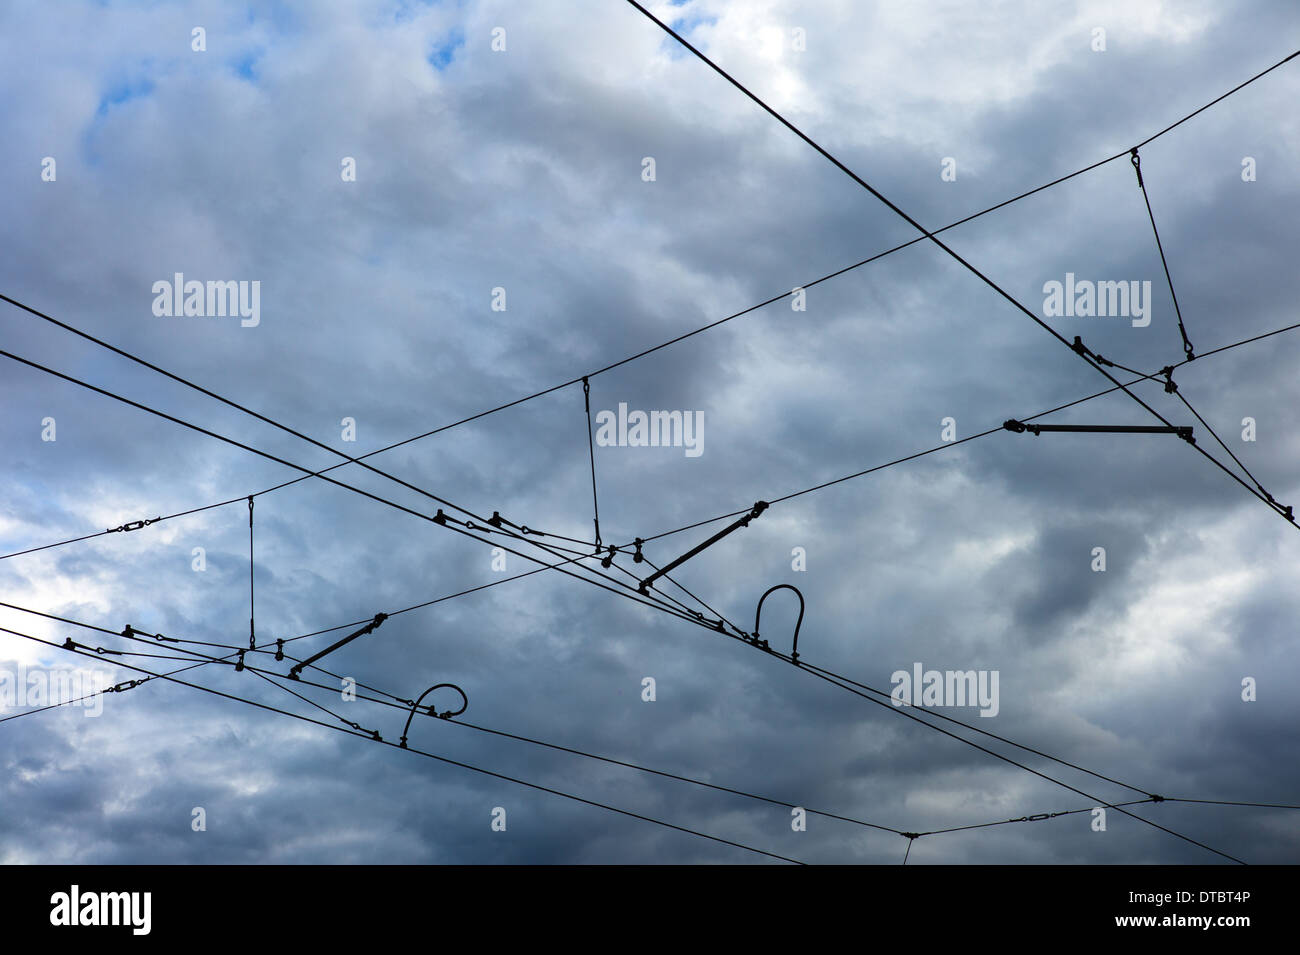 Overhead lines of a tram in front of clouded sky Stock Photo